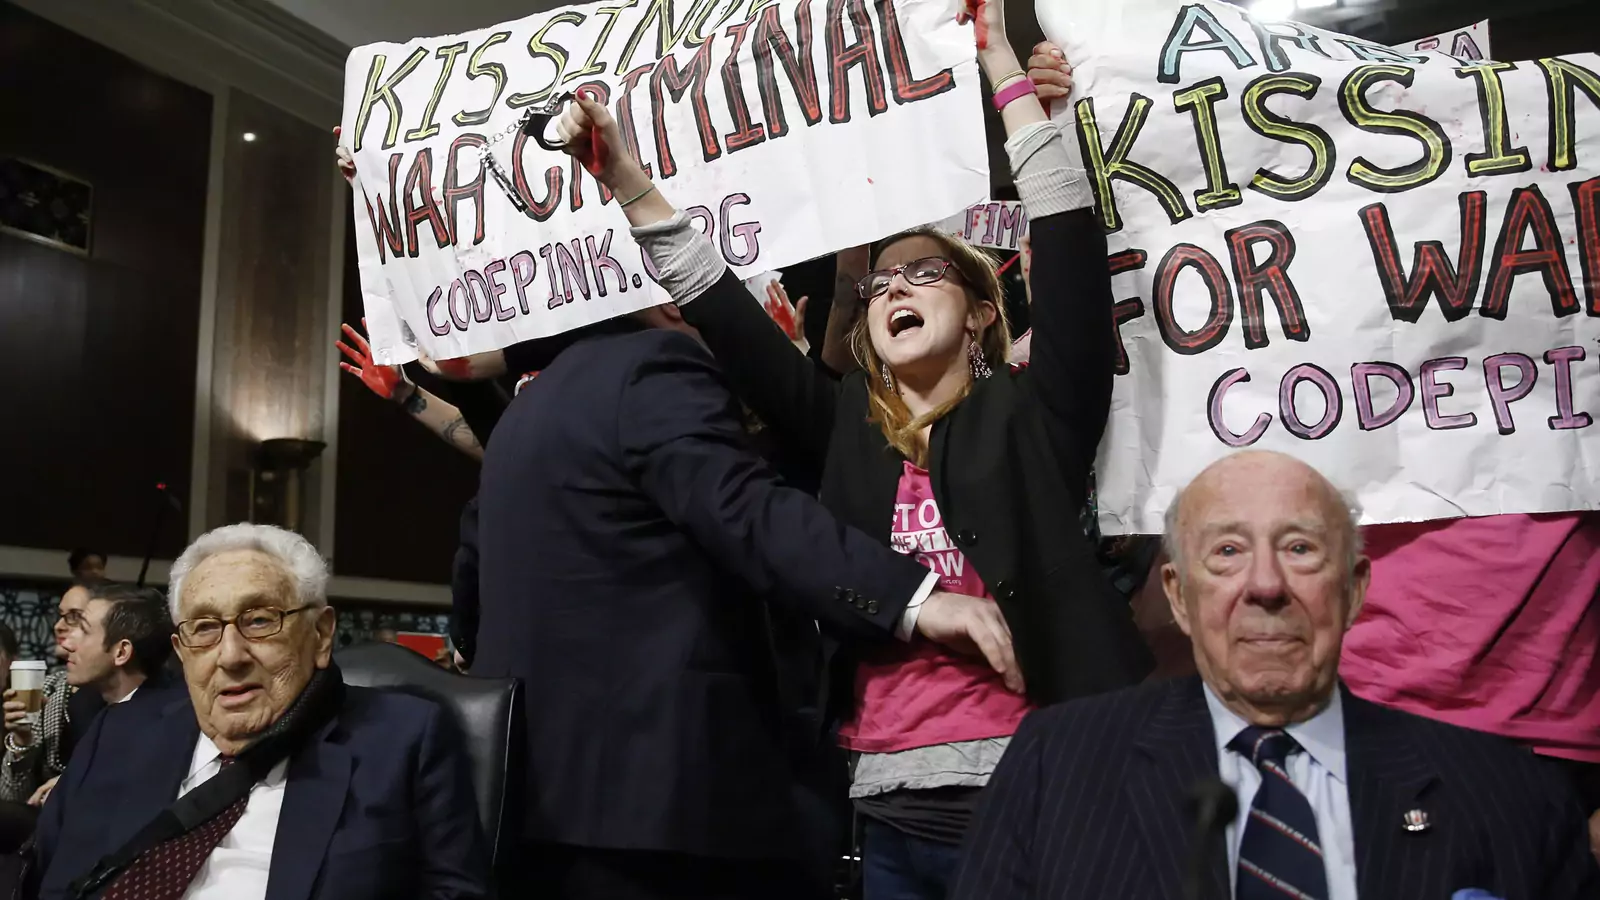 Code Pink demonstrators surround former United States Secretaries of State Henry Kissinger (L) and George Shultz (R) before the beginning of the Senate Armed Services Committee on global challenges and U.S. national security strategy on Capitol Hill